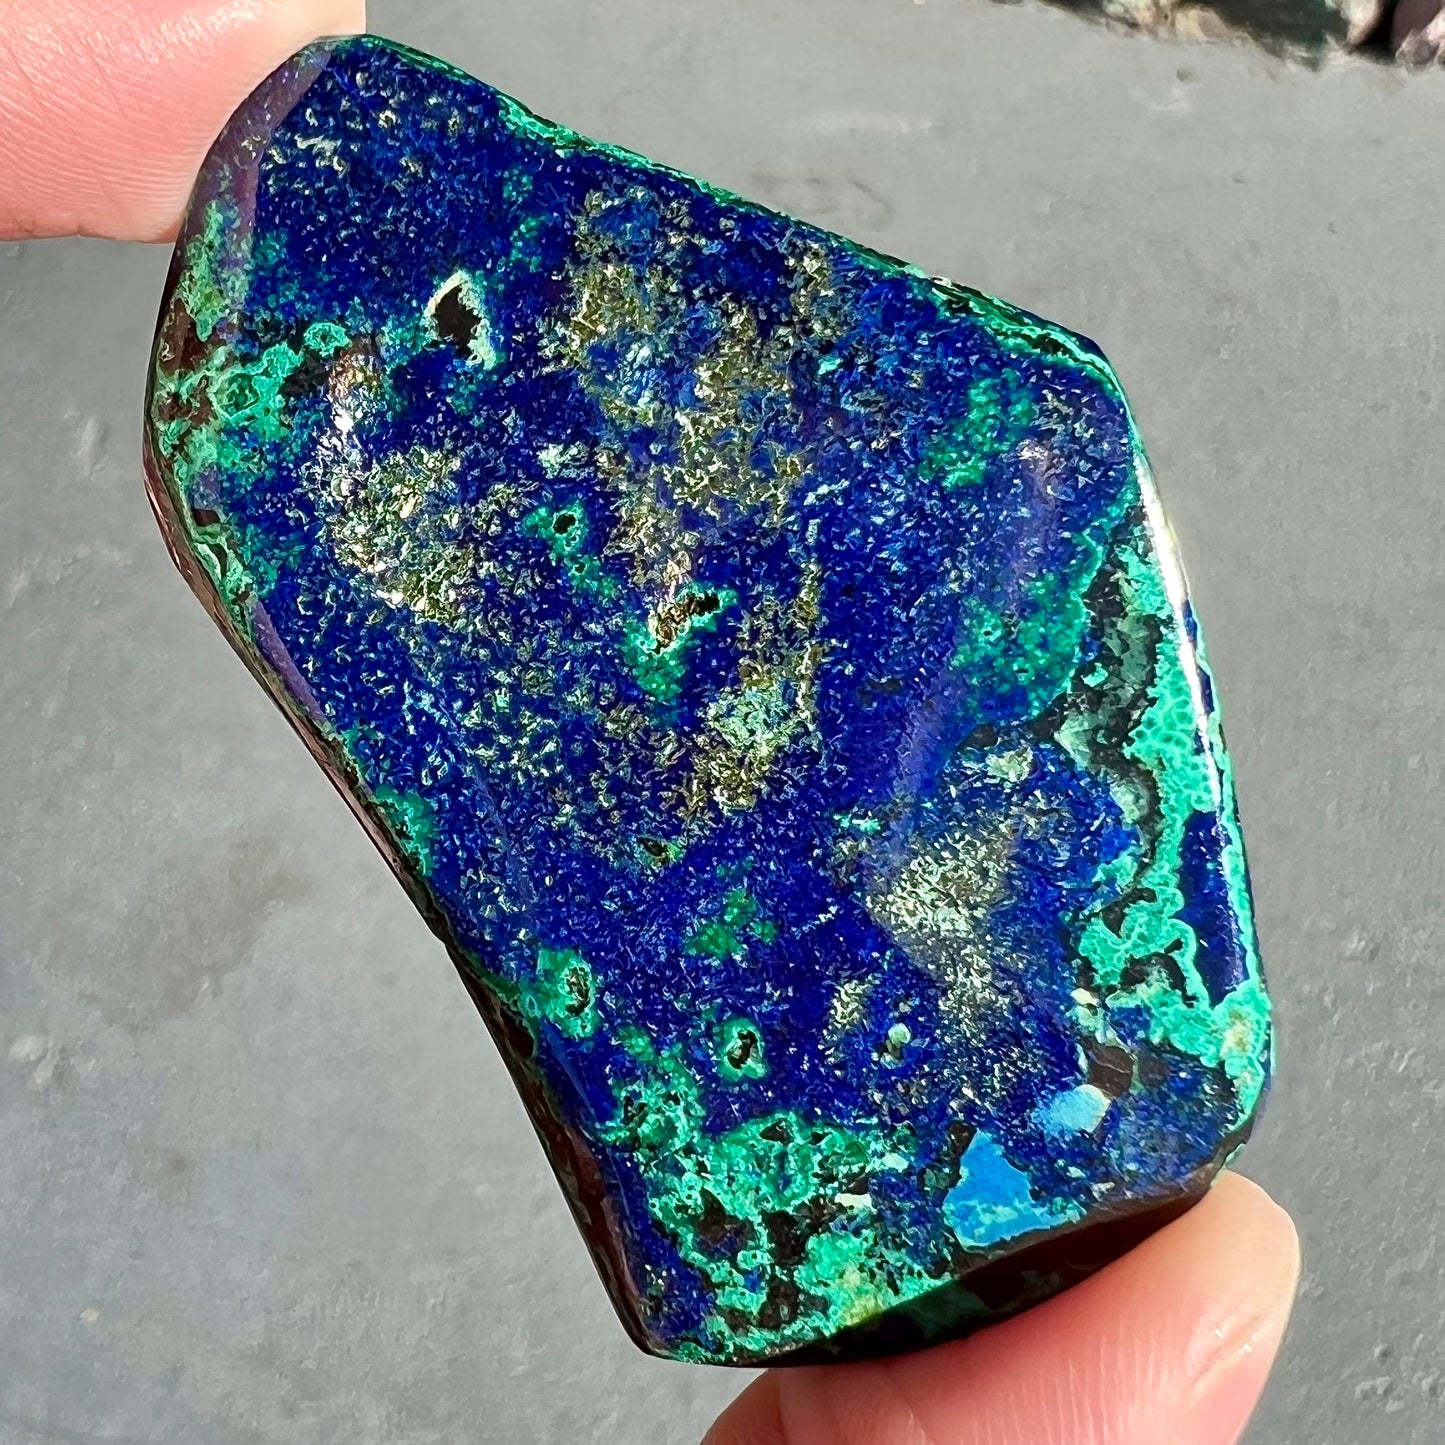 A thick polished slab of azurite with malachite inclusions.